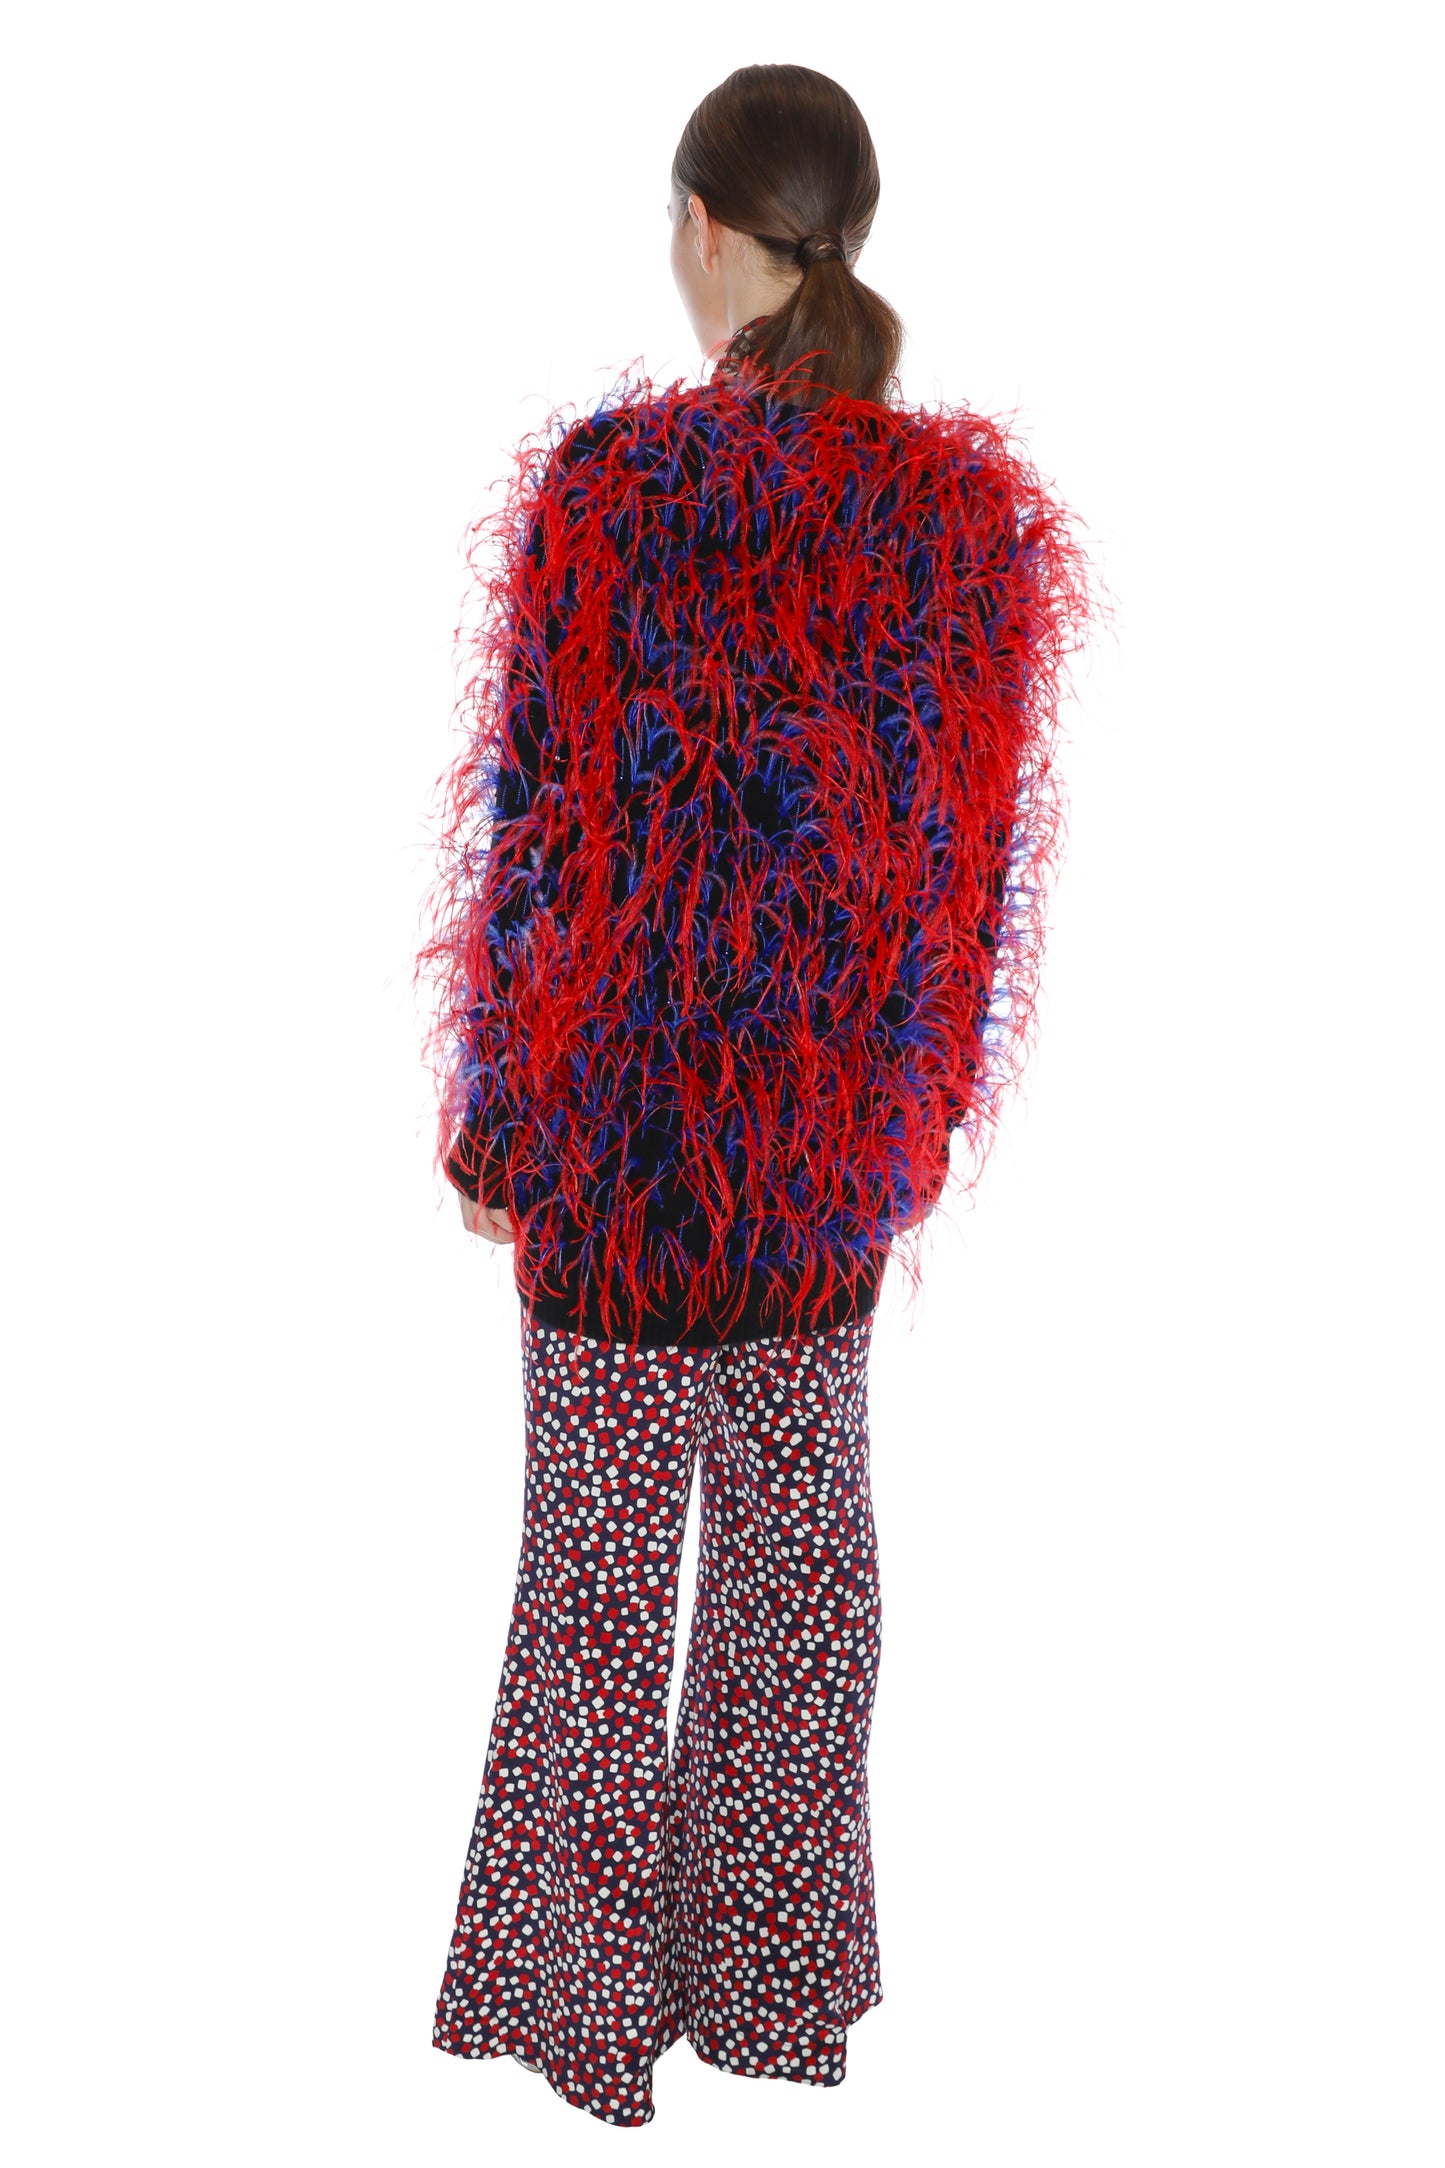 'WHAM BAM' RED FEATHERY CARDIGAN